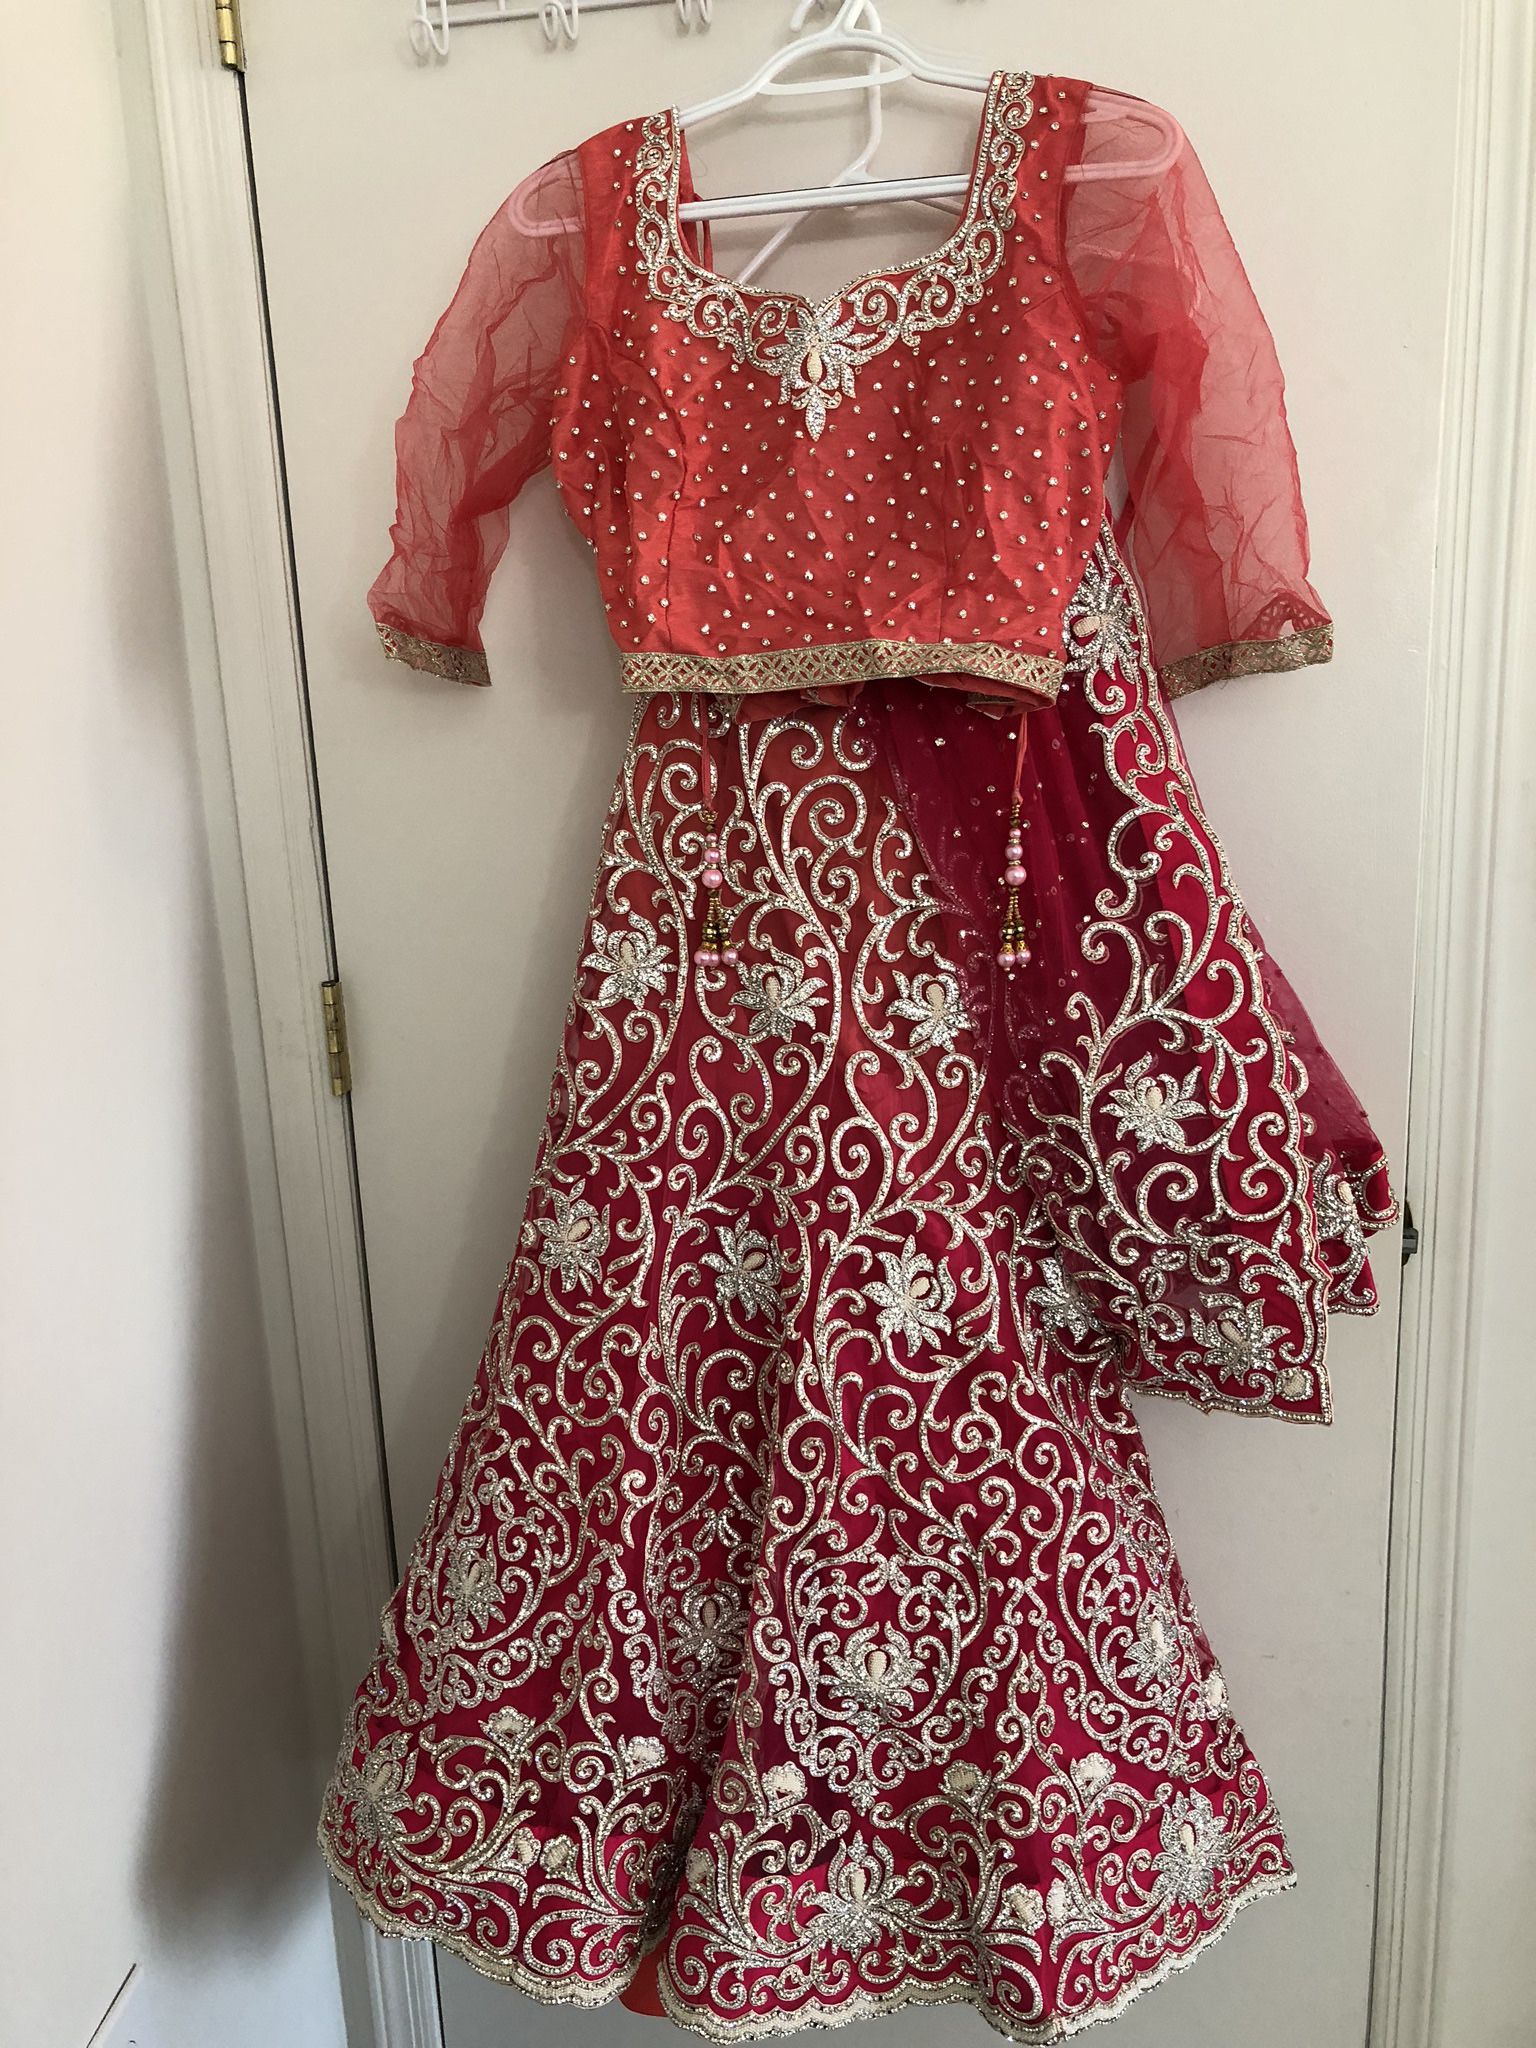 Gorgeous Peach/Pink Ombré Indian Outfit With Diamond work (Blouse, Skirt And Duppatta)